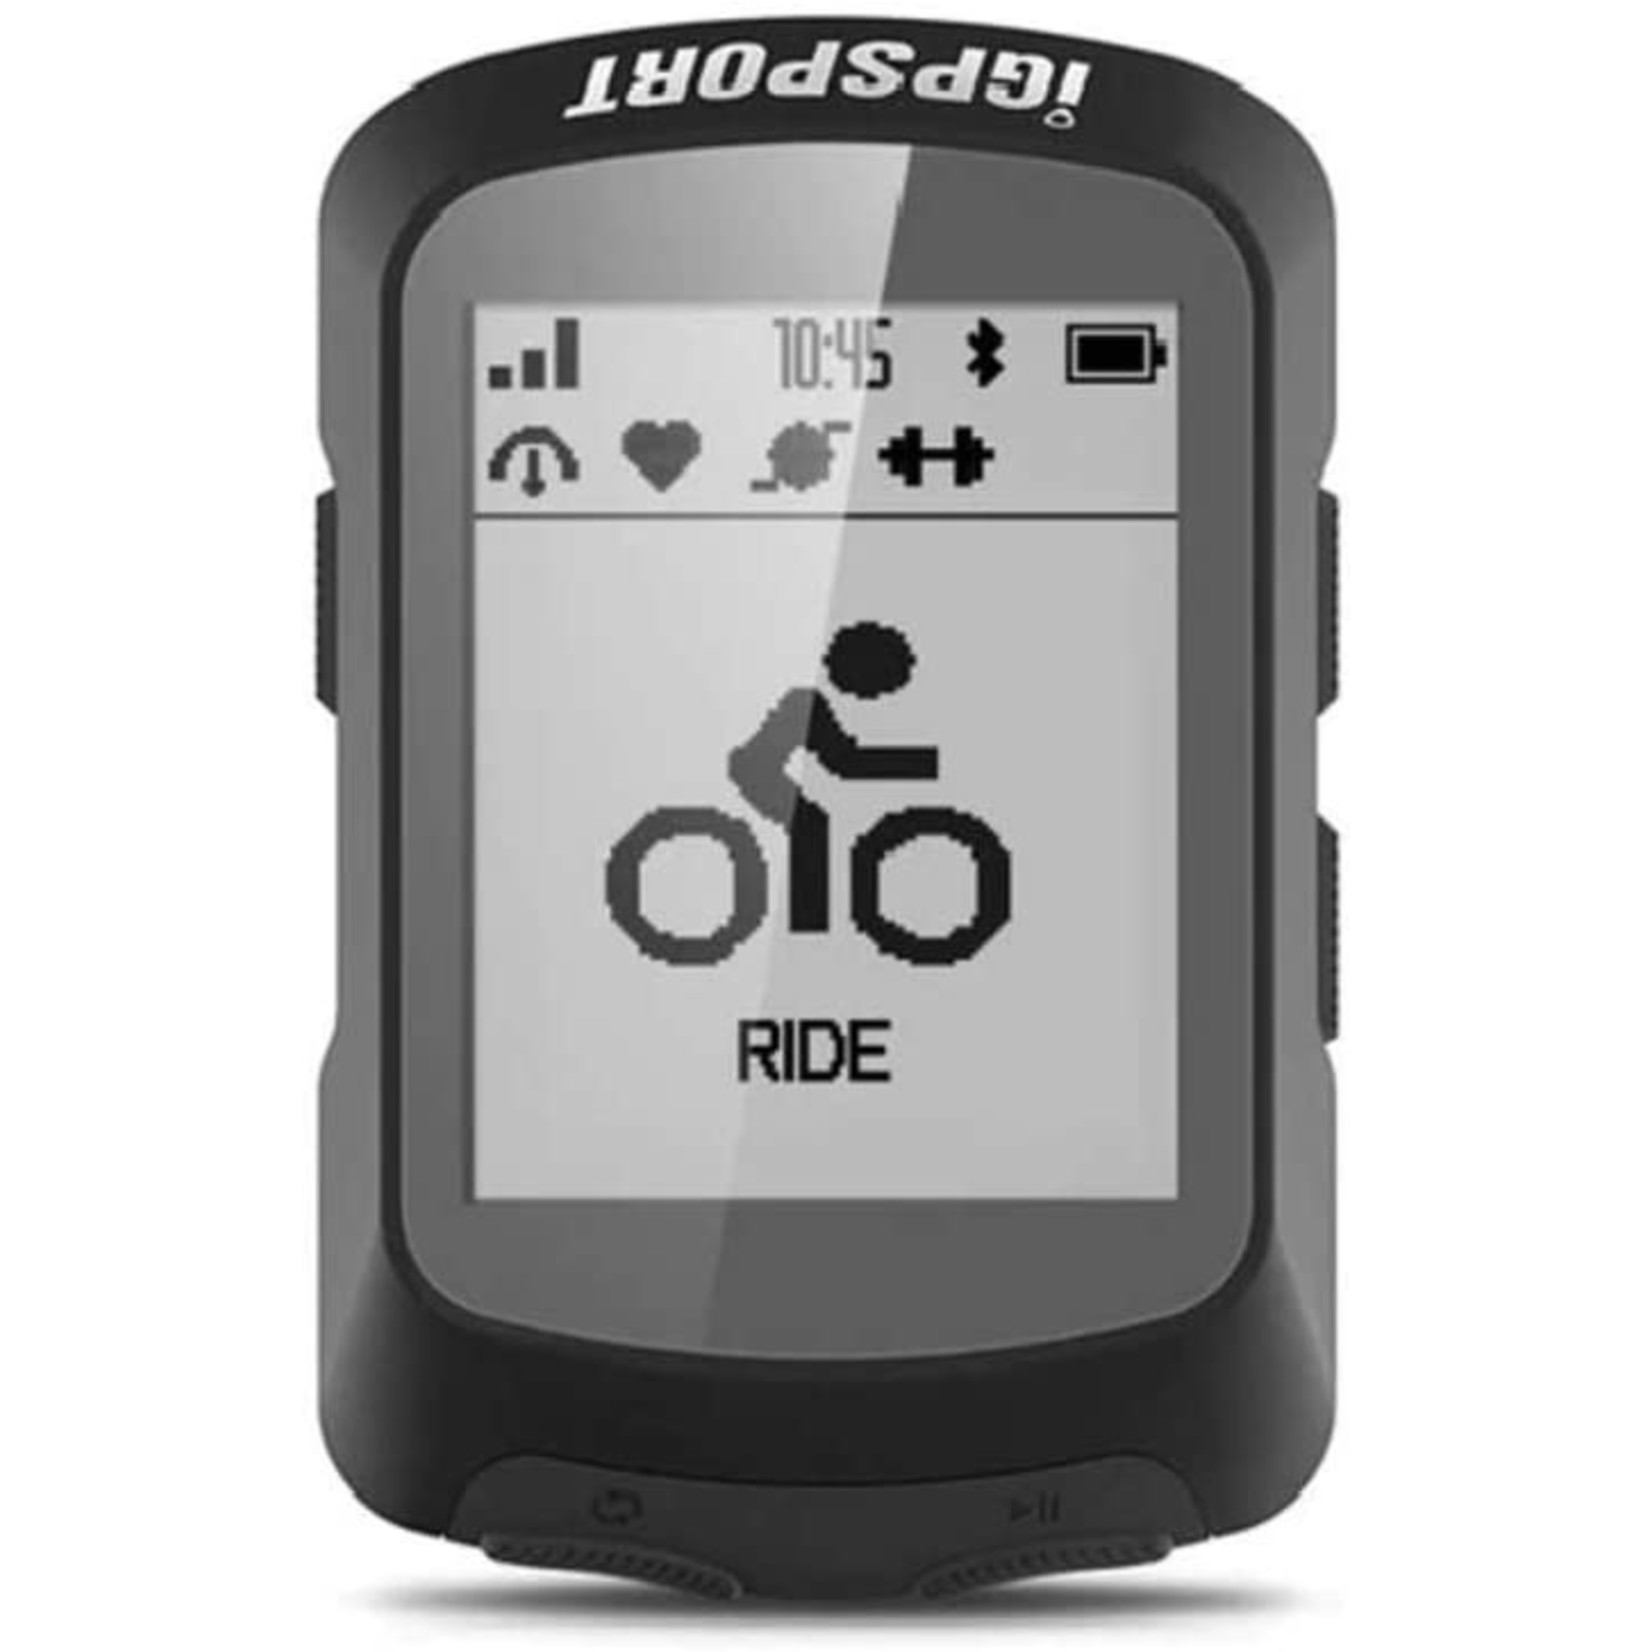 IGS SPORT IGP SPORT IGS520 CPS CYCLE COMPTER